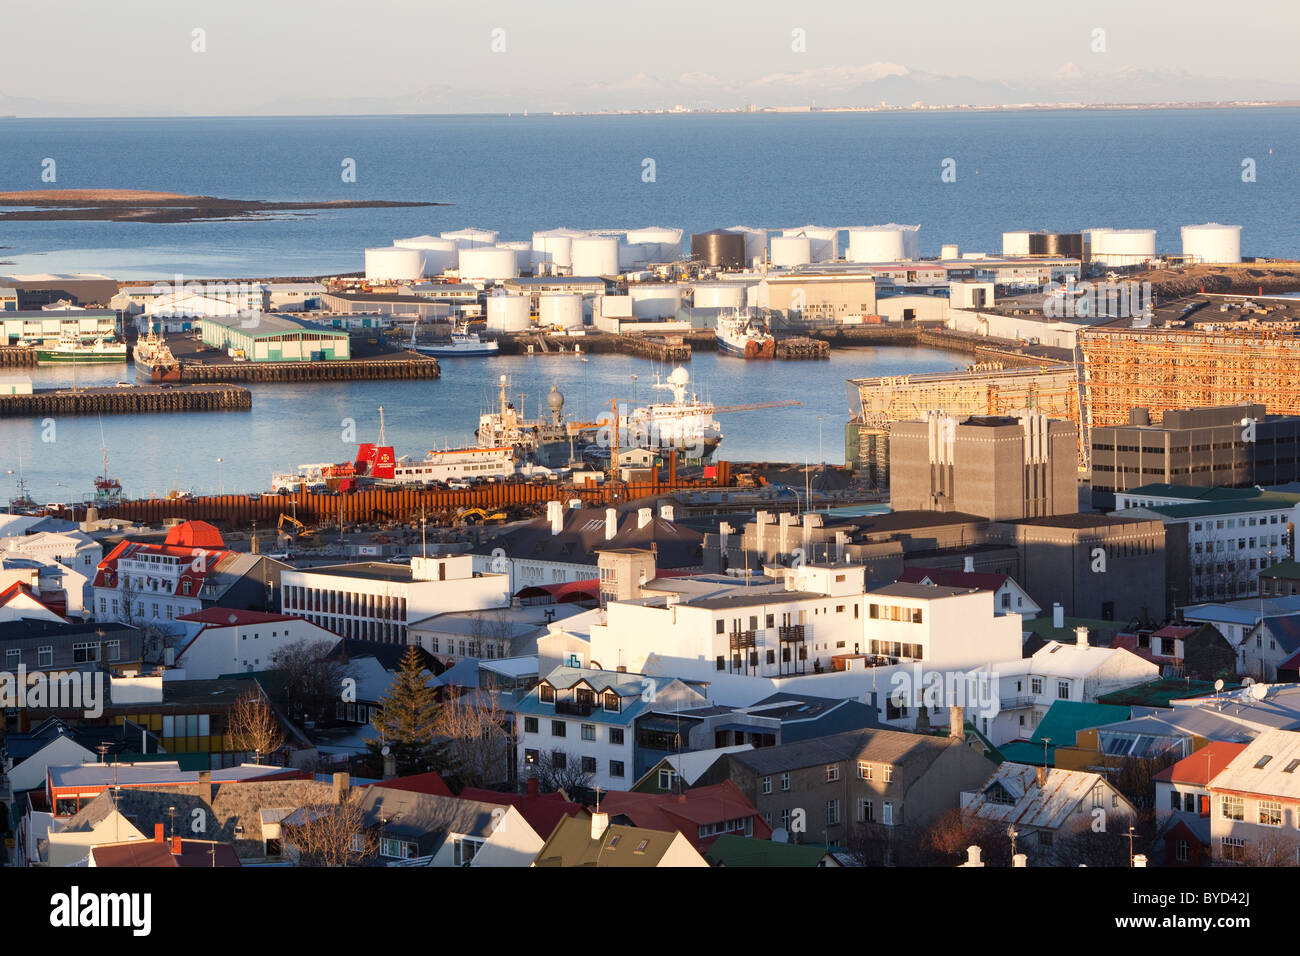 An overview of downtown Reykjavik, Iceland, and its harbour area.  In the distance you can see the town Akranes. Stock Photo